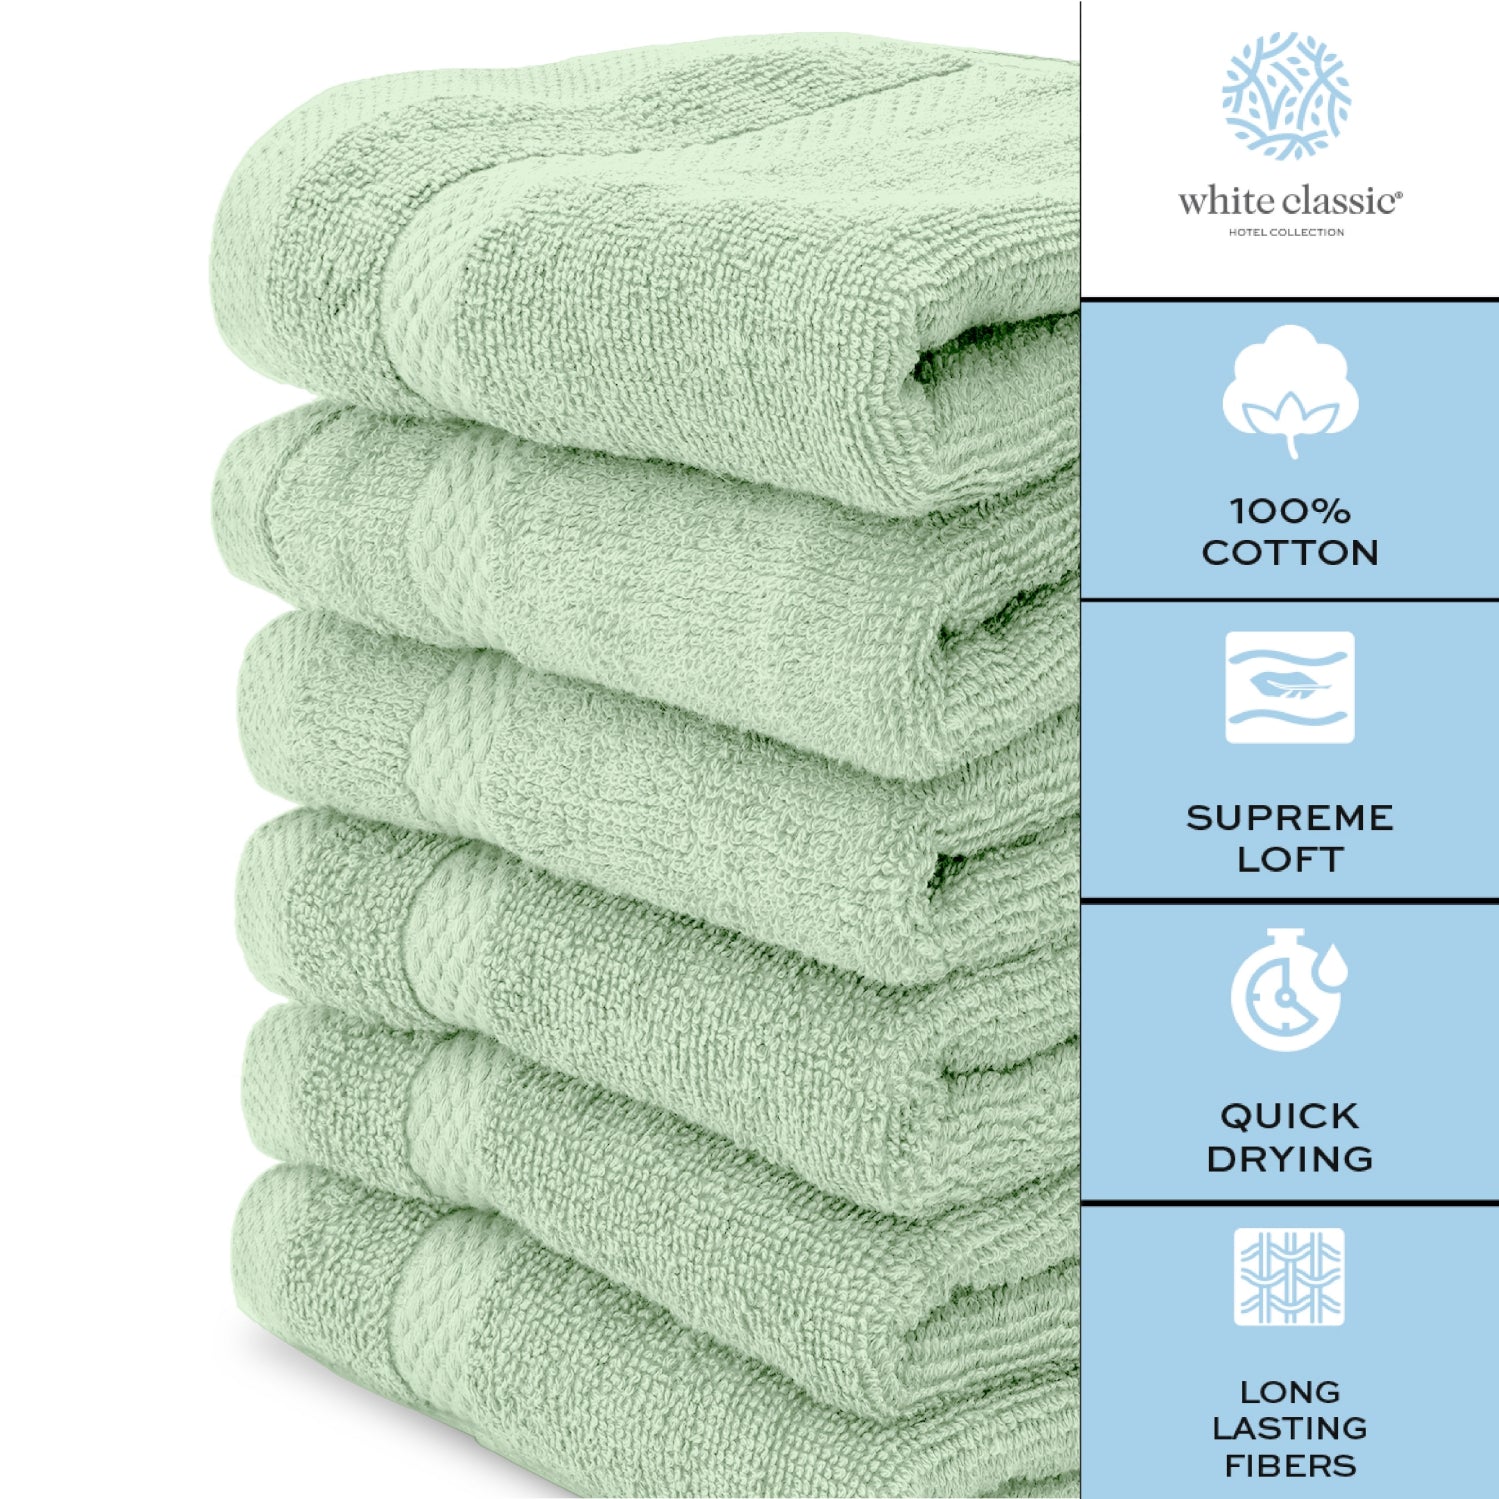 WestPoint Hospitality Five Star Hotel Collection Wash Cloth, Optical White,  13 W x 13 L, Washcloths, Towels, Bed and Bath Linens, Open Catalog